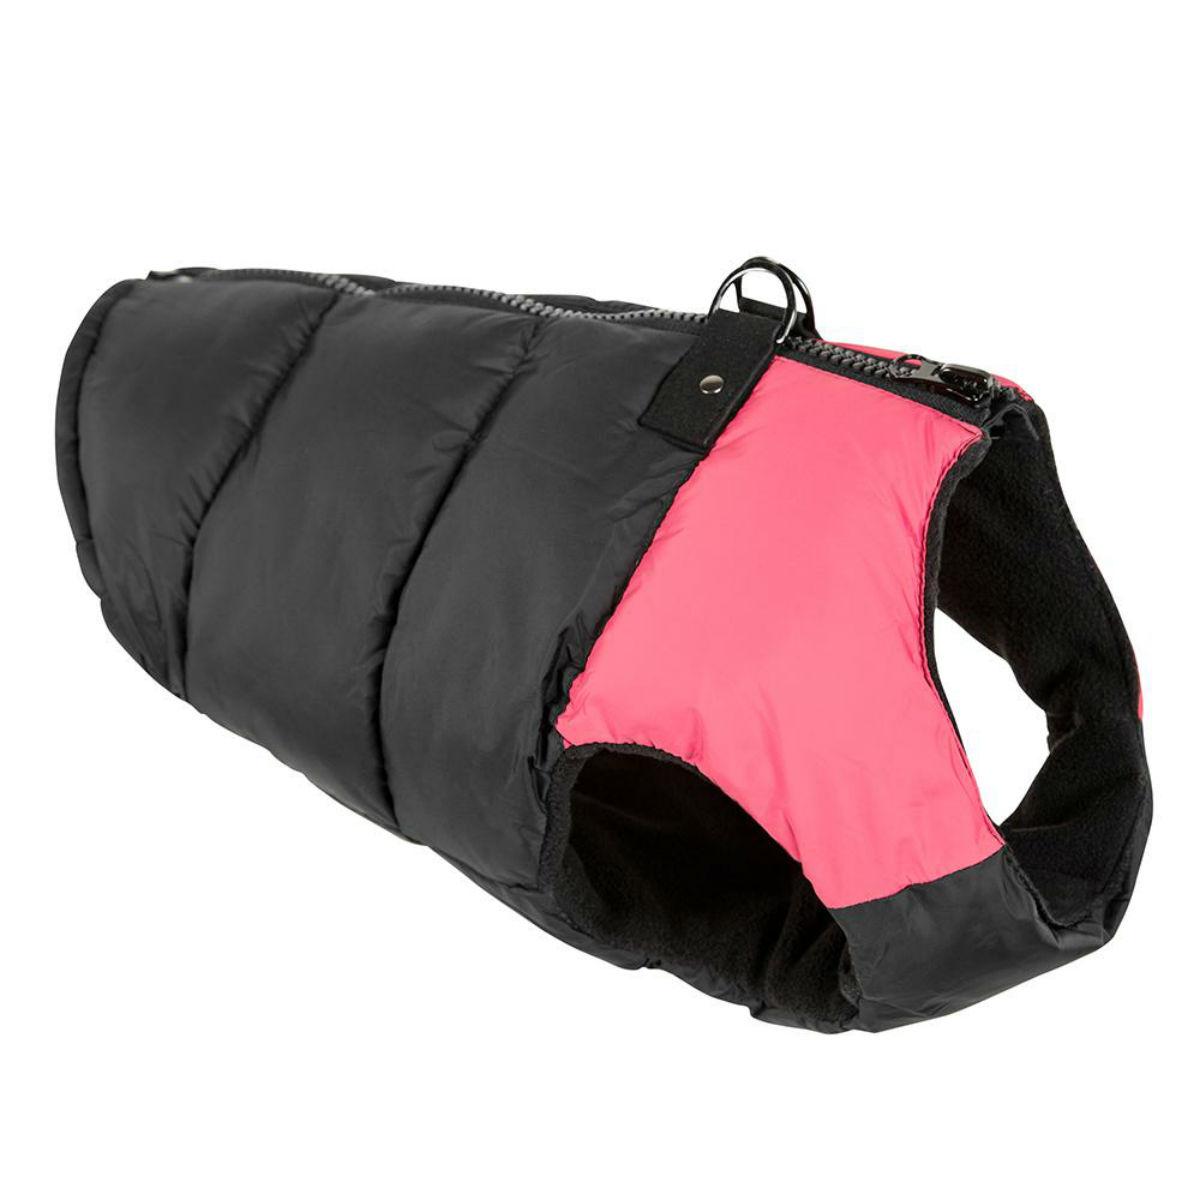 Padded Dog Harness Vest by Gooby - Pink/Black